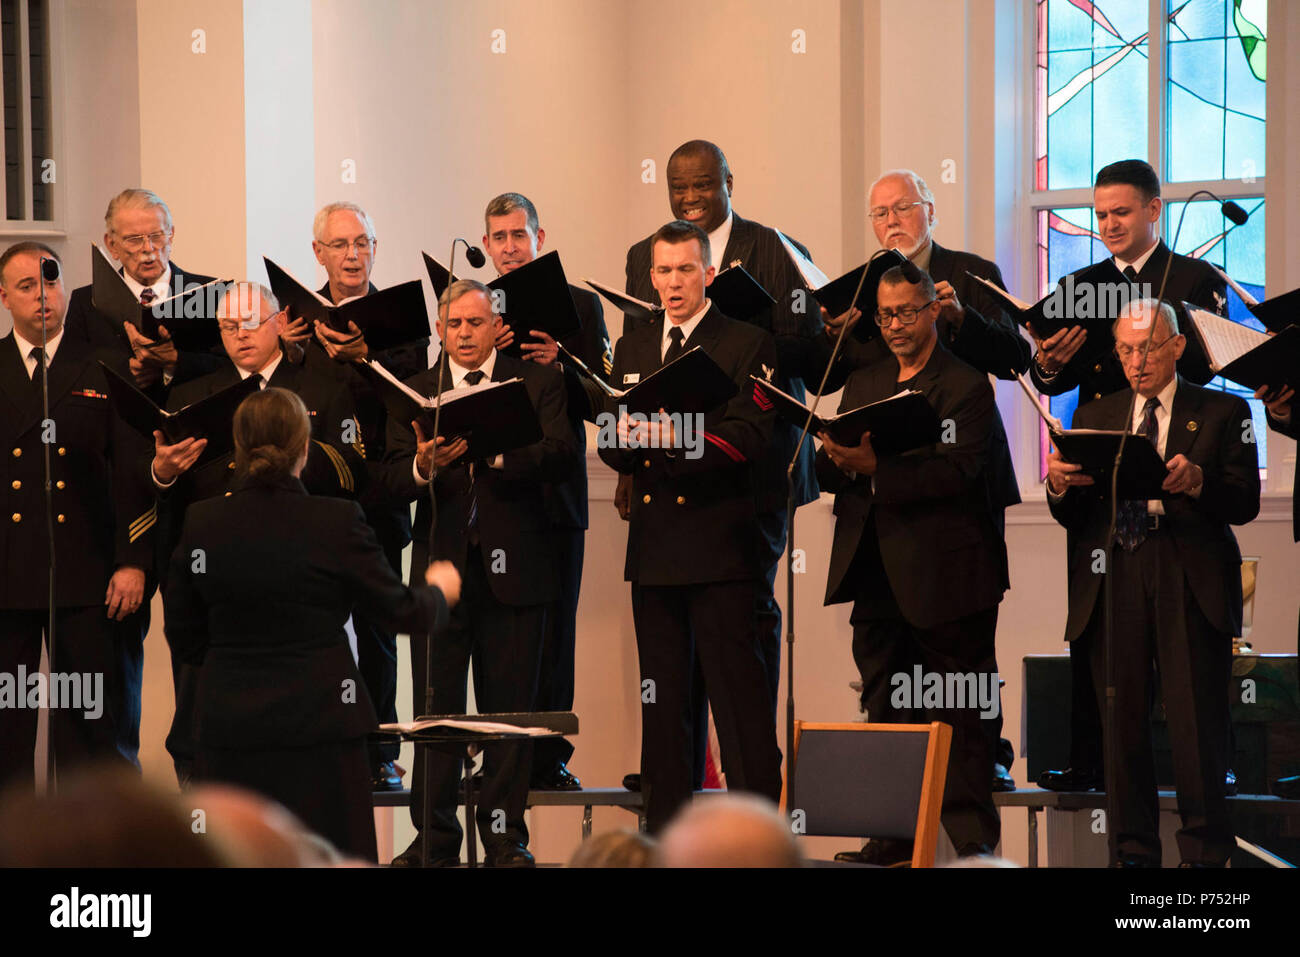 ANNANDALE, VIRGINIA  (October 30, 2016) Chief Petty Officer Casey Campbell, left, leads the men of the U.S. Navy Band Sea Chanters chorus during their 60th anniversary concert as they perform traditional sea chanteys. The Sea Chanters celebrated their 60th anniversary iin Annandale, Virginia, with a concert featuring alumni from the group. The chorus was formed as an all-male group in 1956 and tasked with perpetuating the songs of the sea. In 1980, the group added women to their ranks and expanded their repertoire to include everything from Brahms to Broadway. Stock Photo